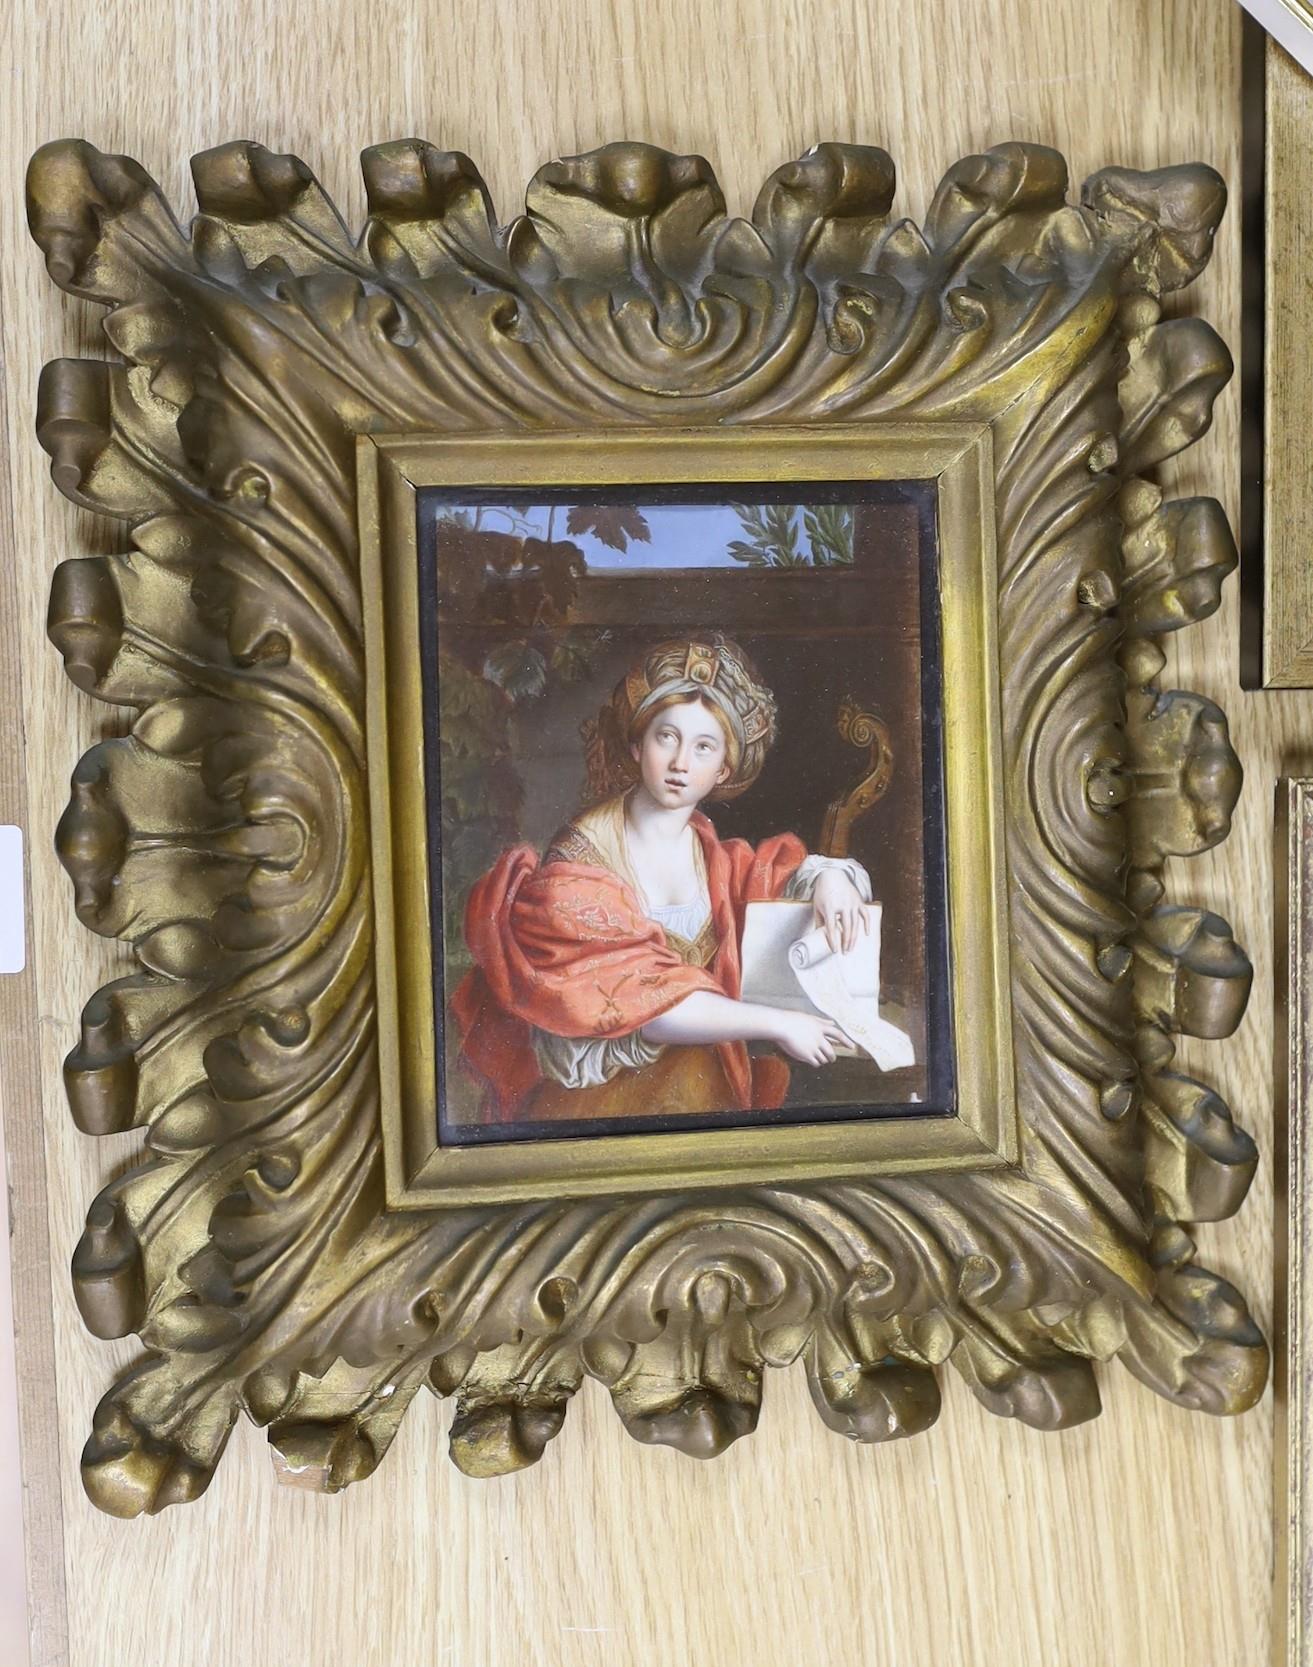 After Domenichino, watercolour on ivory, ‘The Cumaean Sibyl’, 12 x 10cm Ivory submission - Image 2 of 2